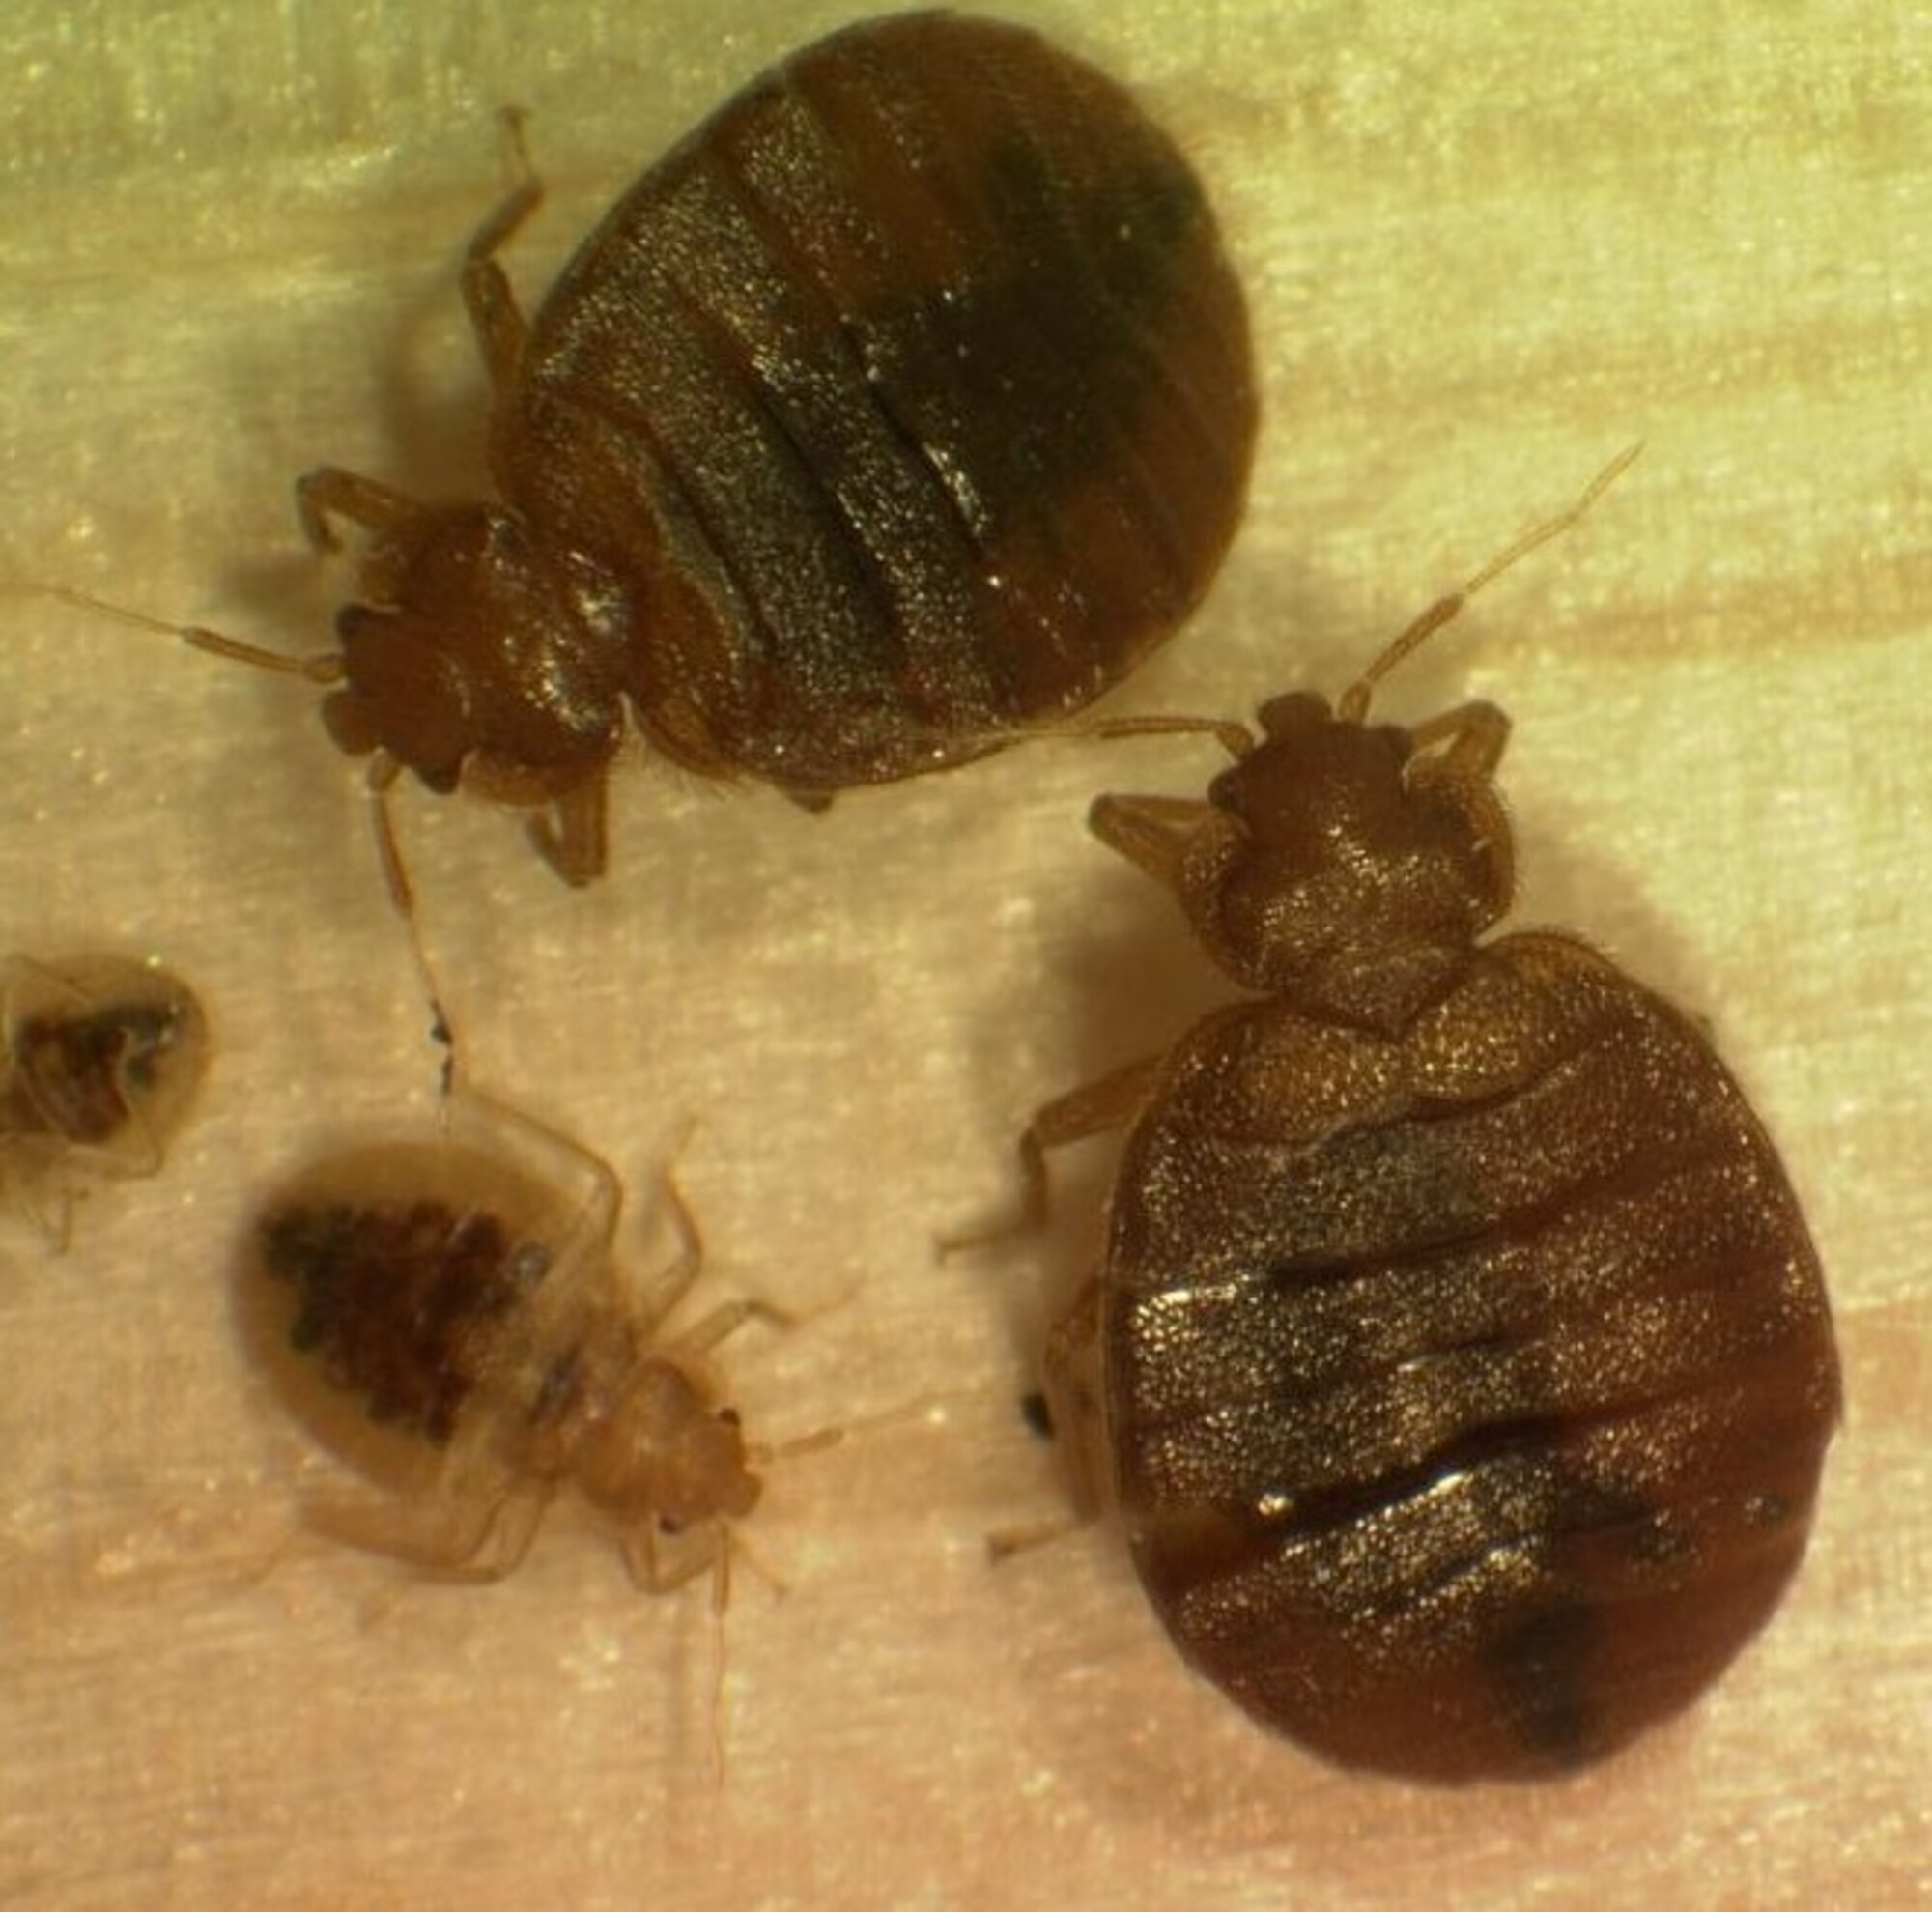 Bedbugs in adult stage and second instar stage. (Courtesy photo/U.S EPA)